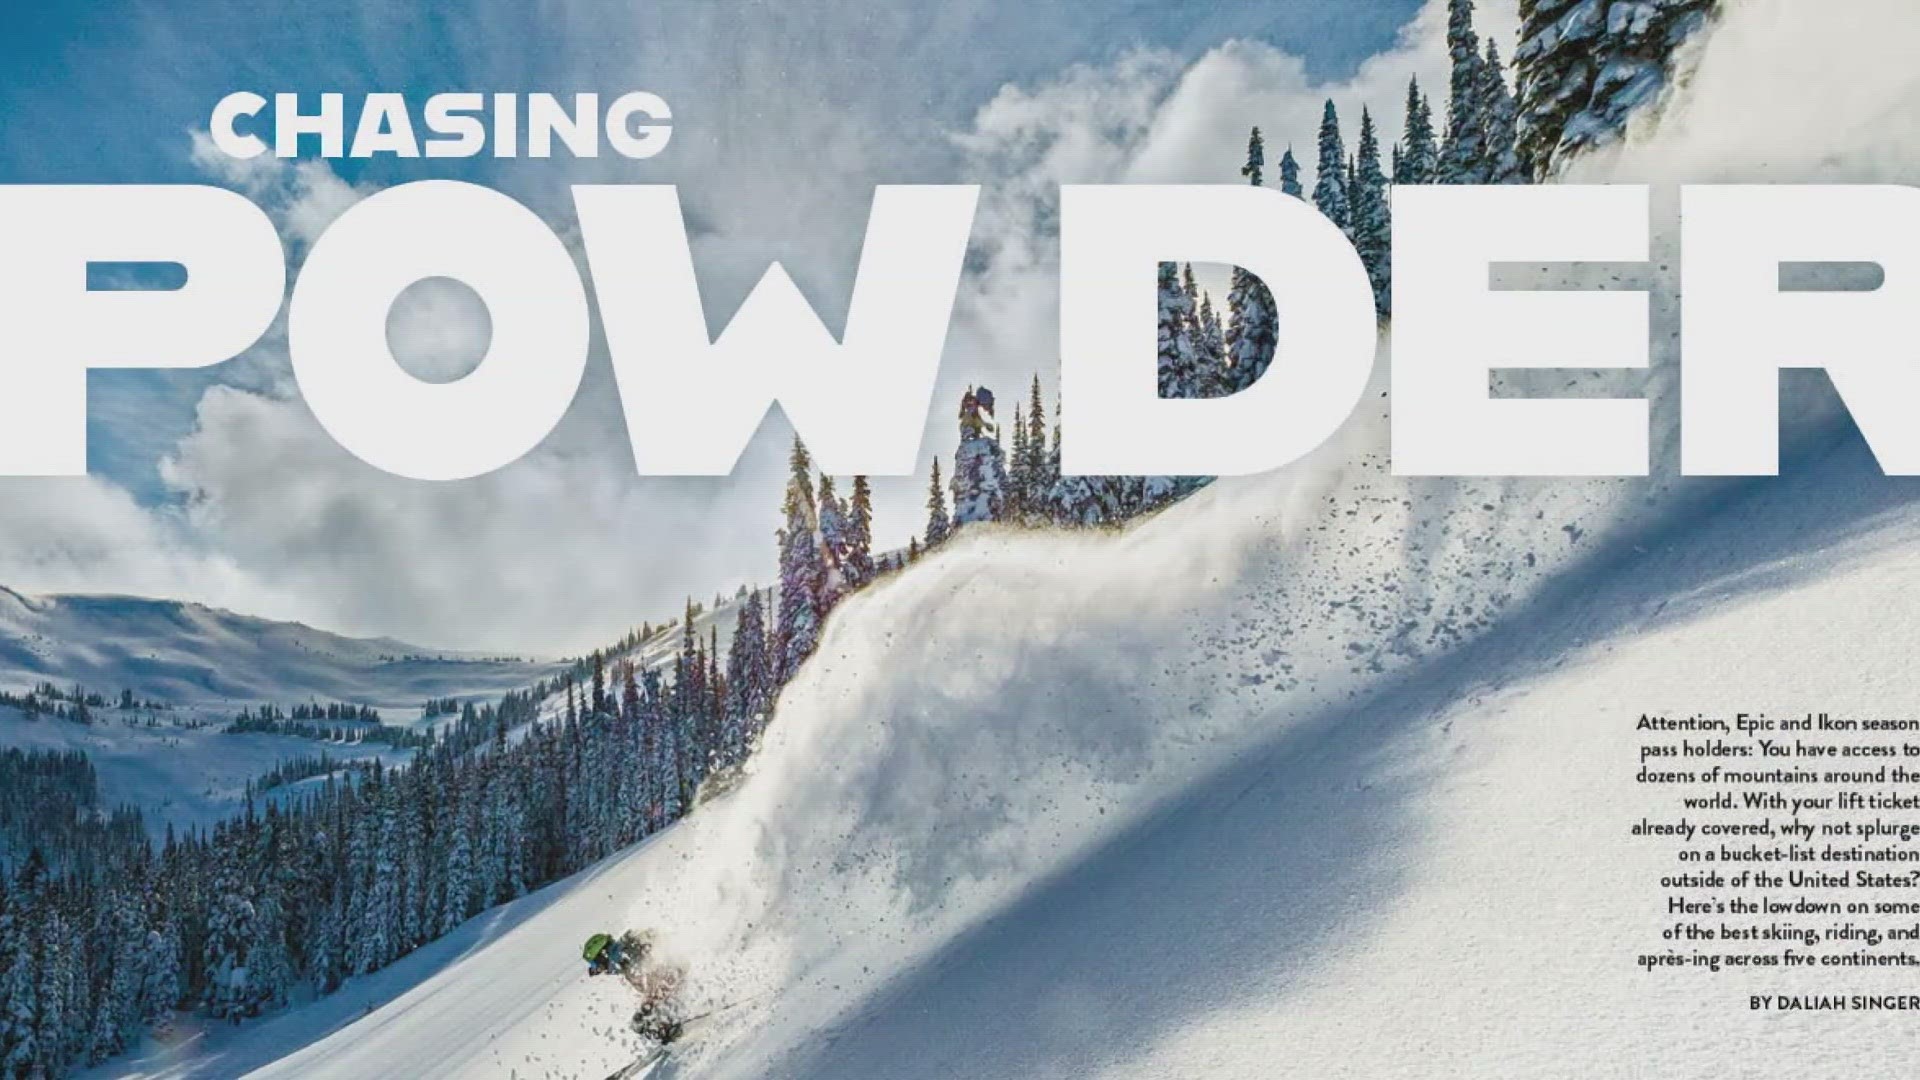 5280 Magazine's November issue is all about chasing powder, and features some of the best skiing and riding opportunities across the world.